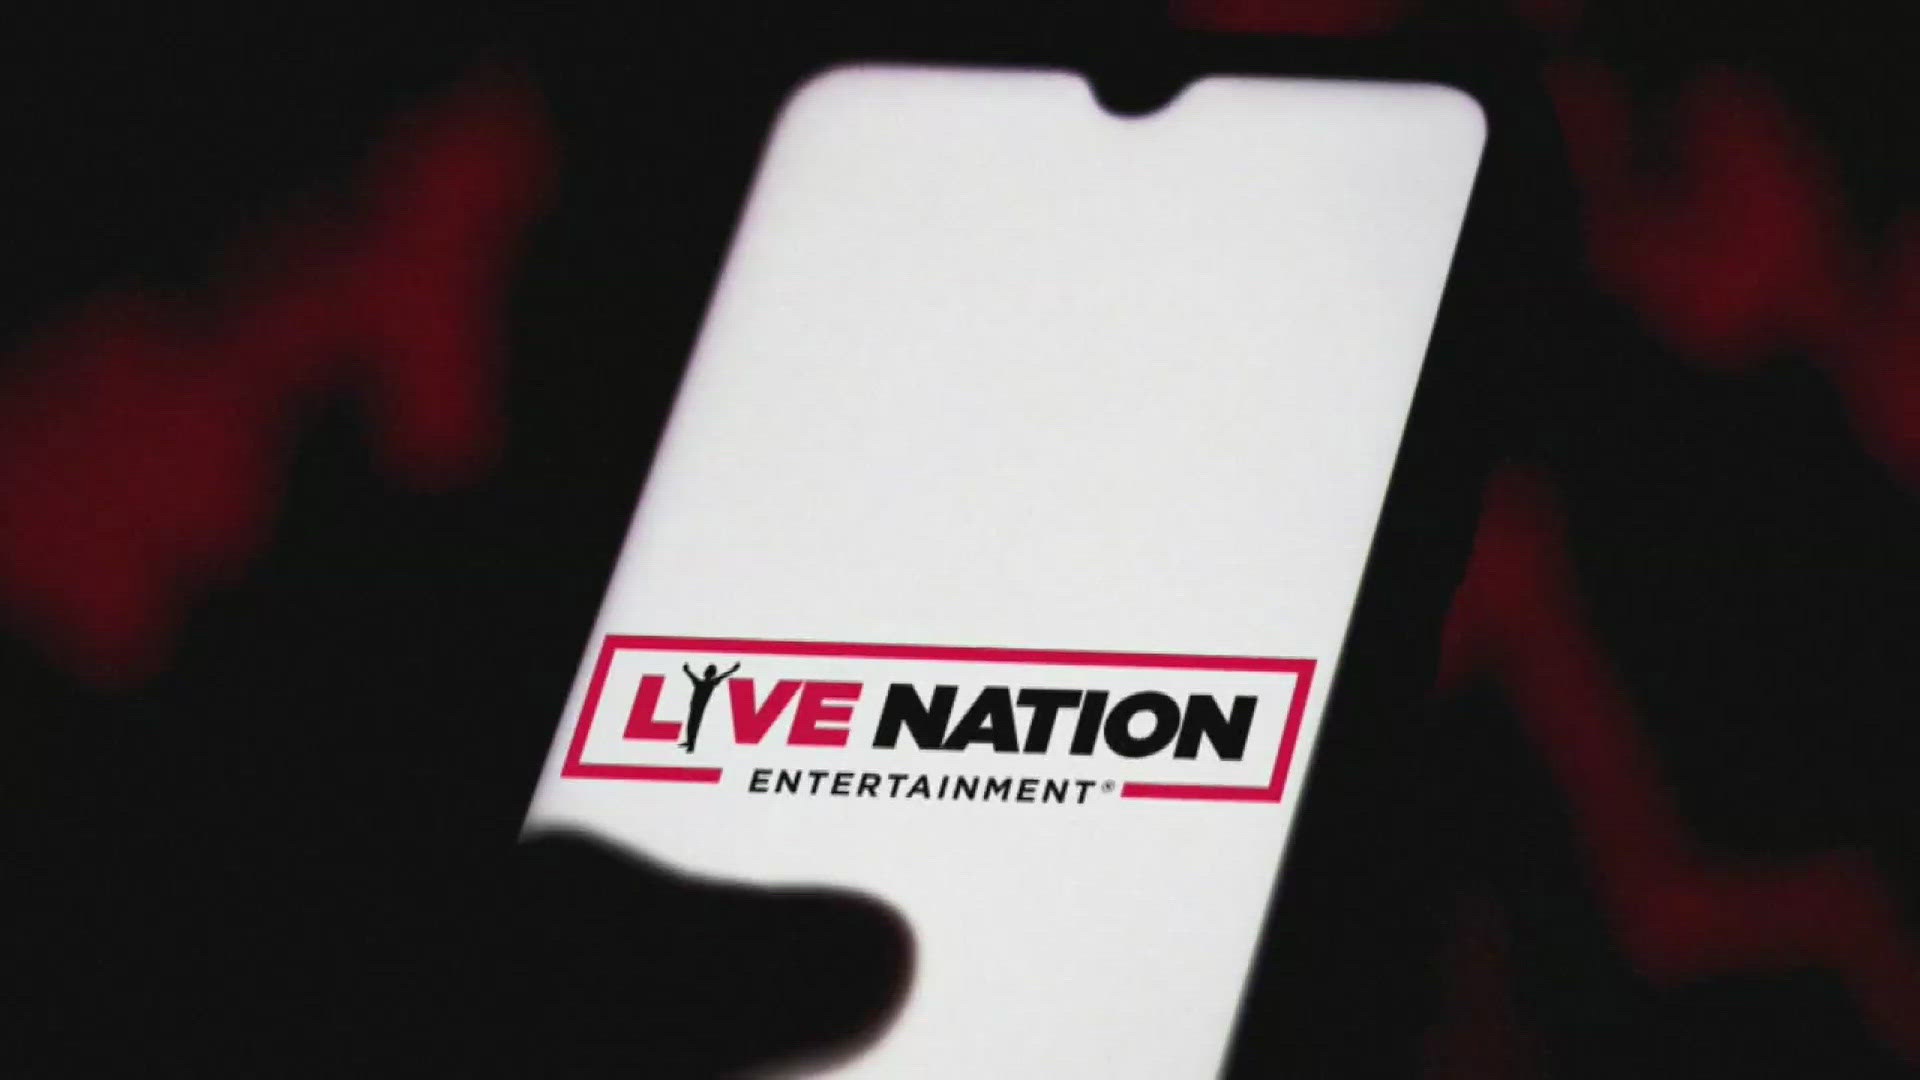 The Justice Department accuses Live Nation of a slew of practices that allow it to maintain a stronghold over the live music scene.